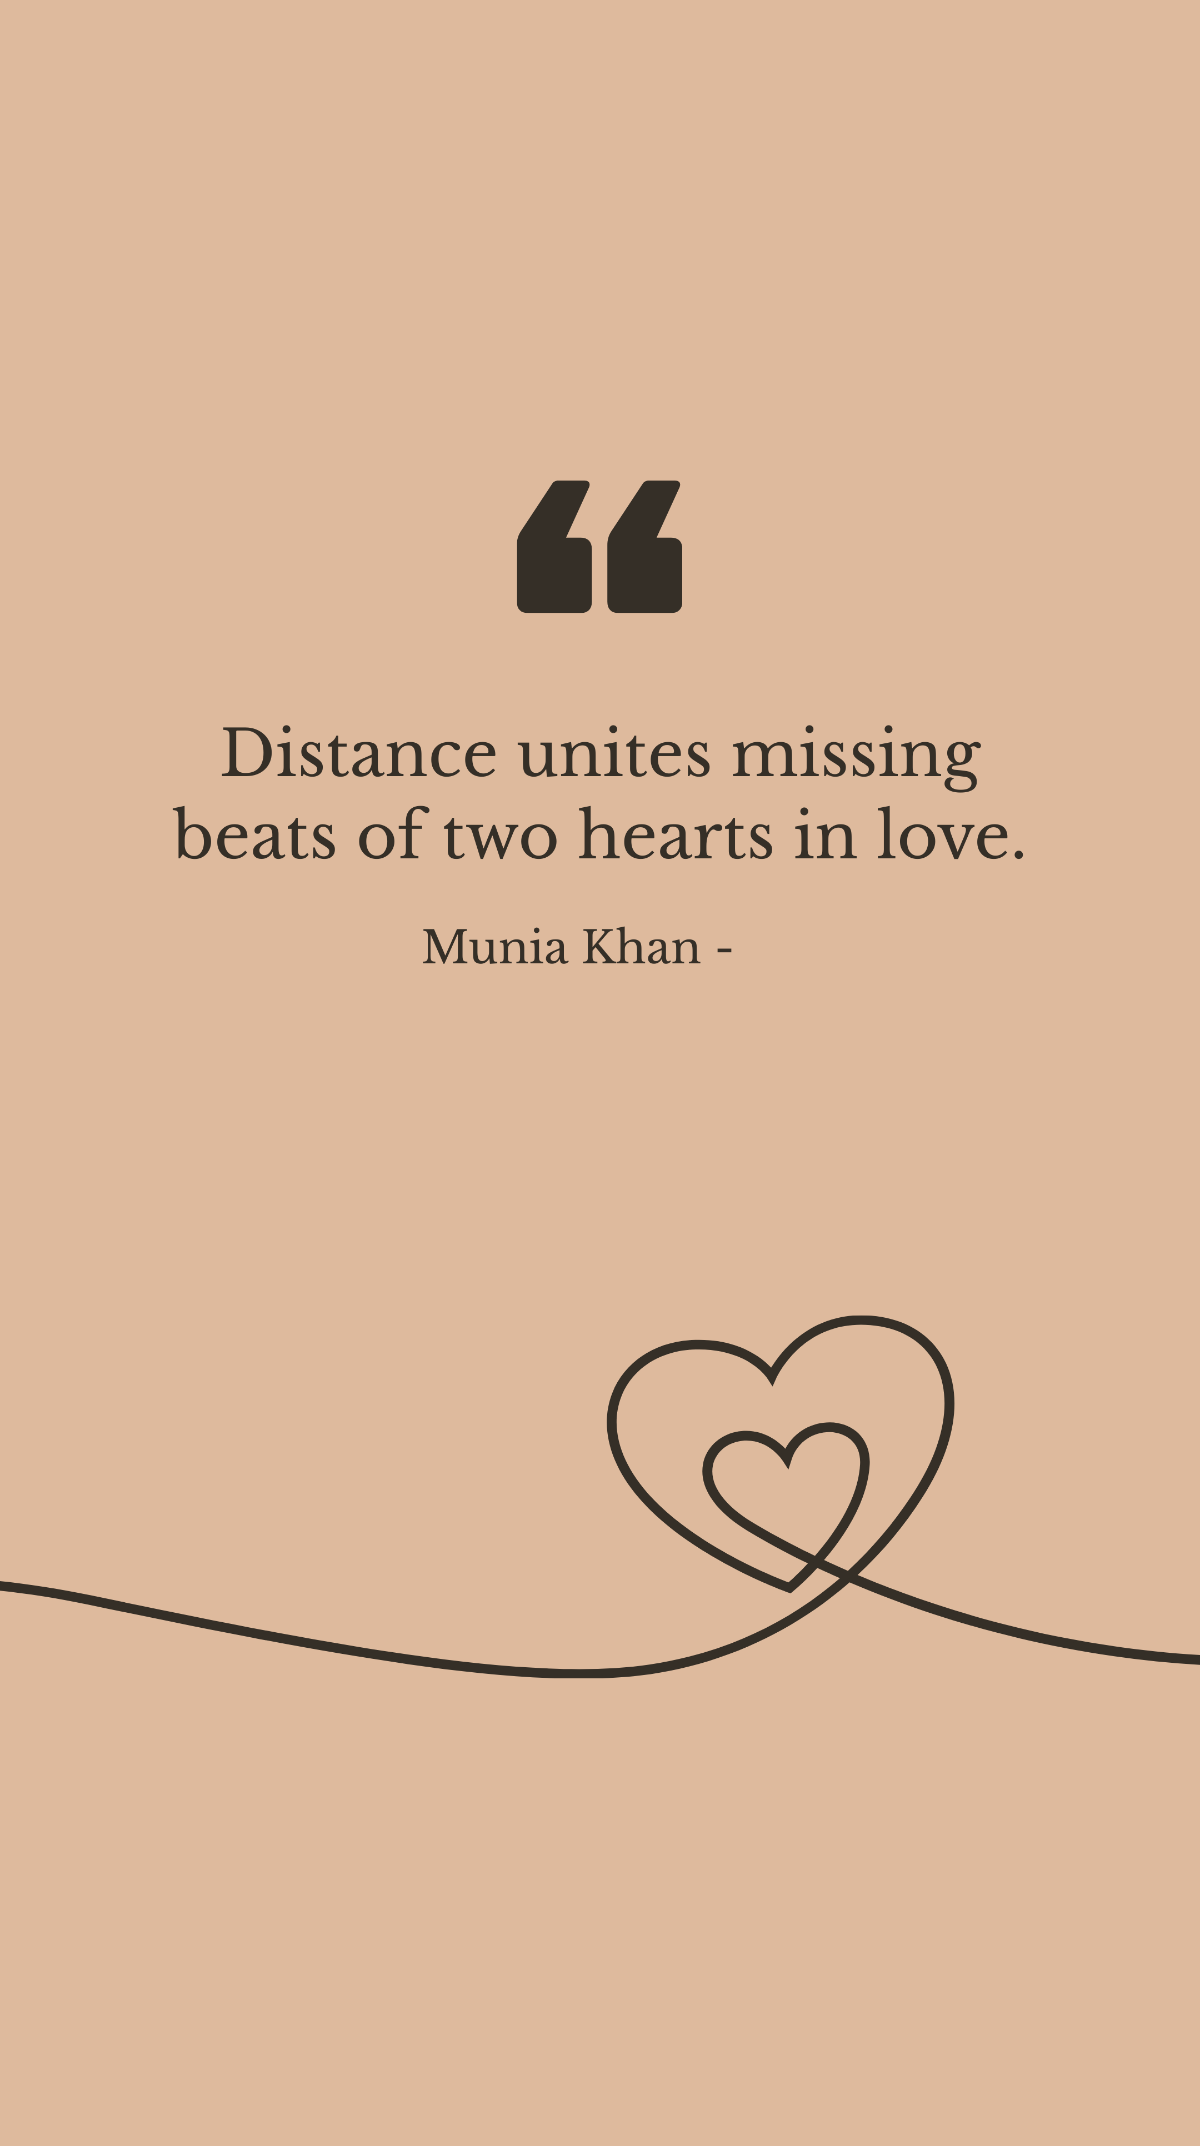 Munia Khan - Distance unites missing beats of two hearts in love. Template